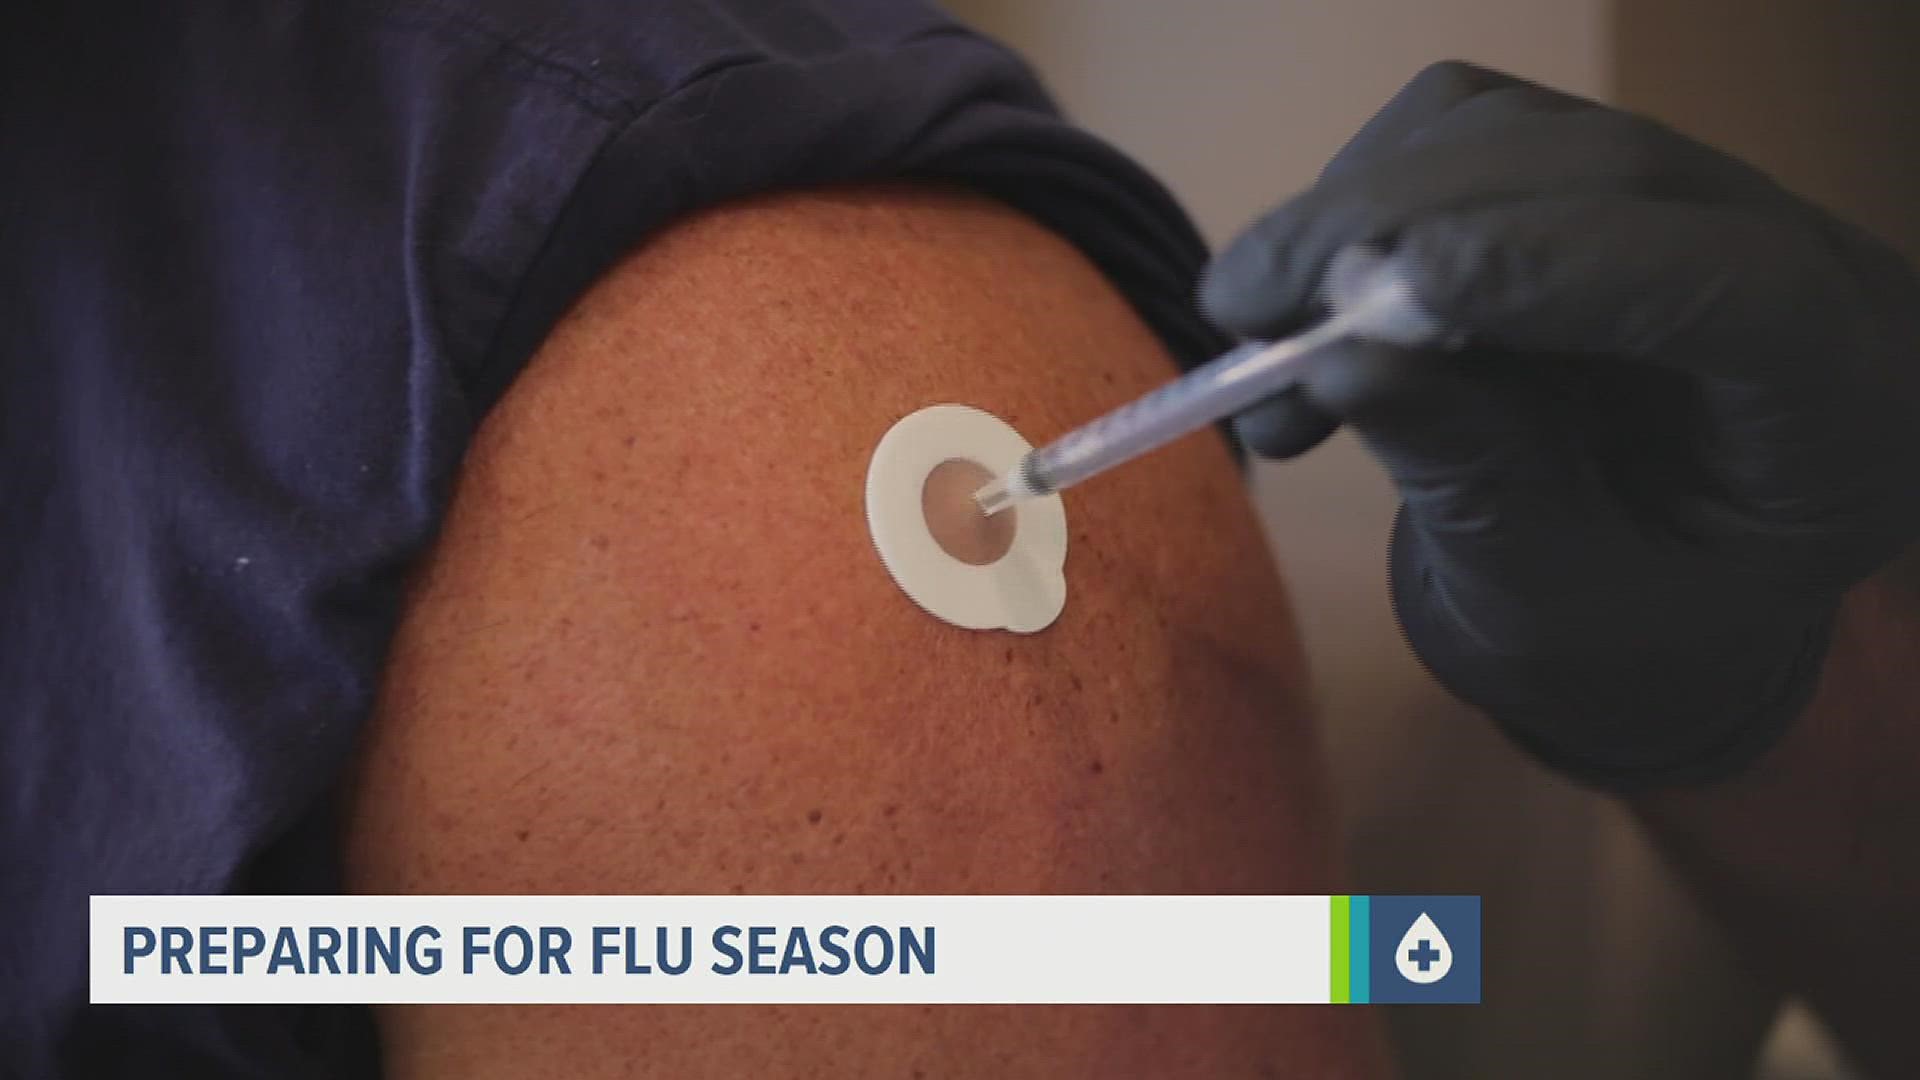 Healthcare experts are urging everyone to get their flu vaccines in addition to their COVID-19 boosters to prevent a crush of patients at the hospital.